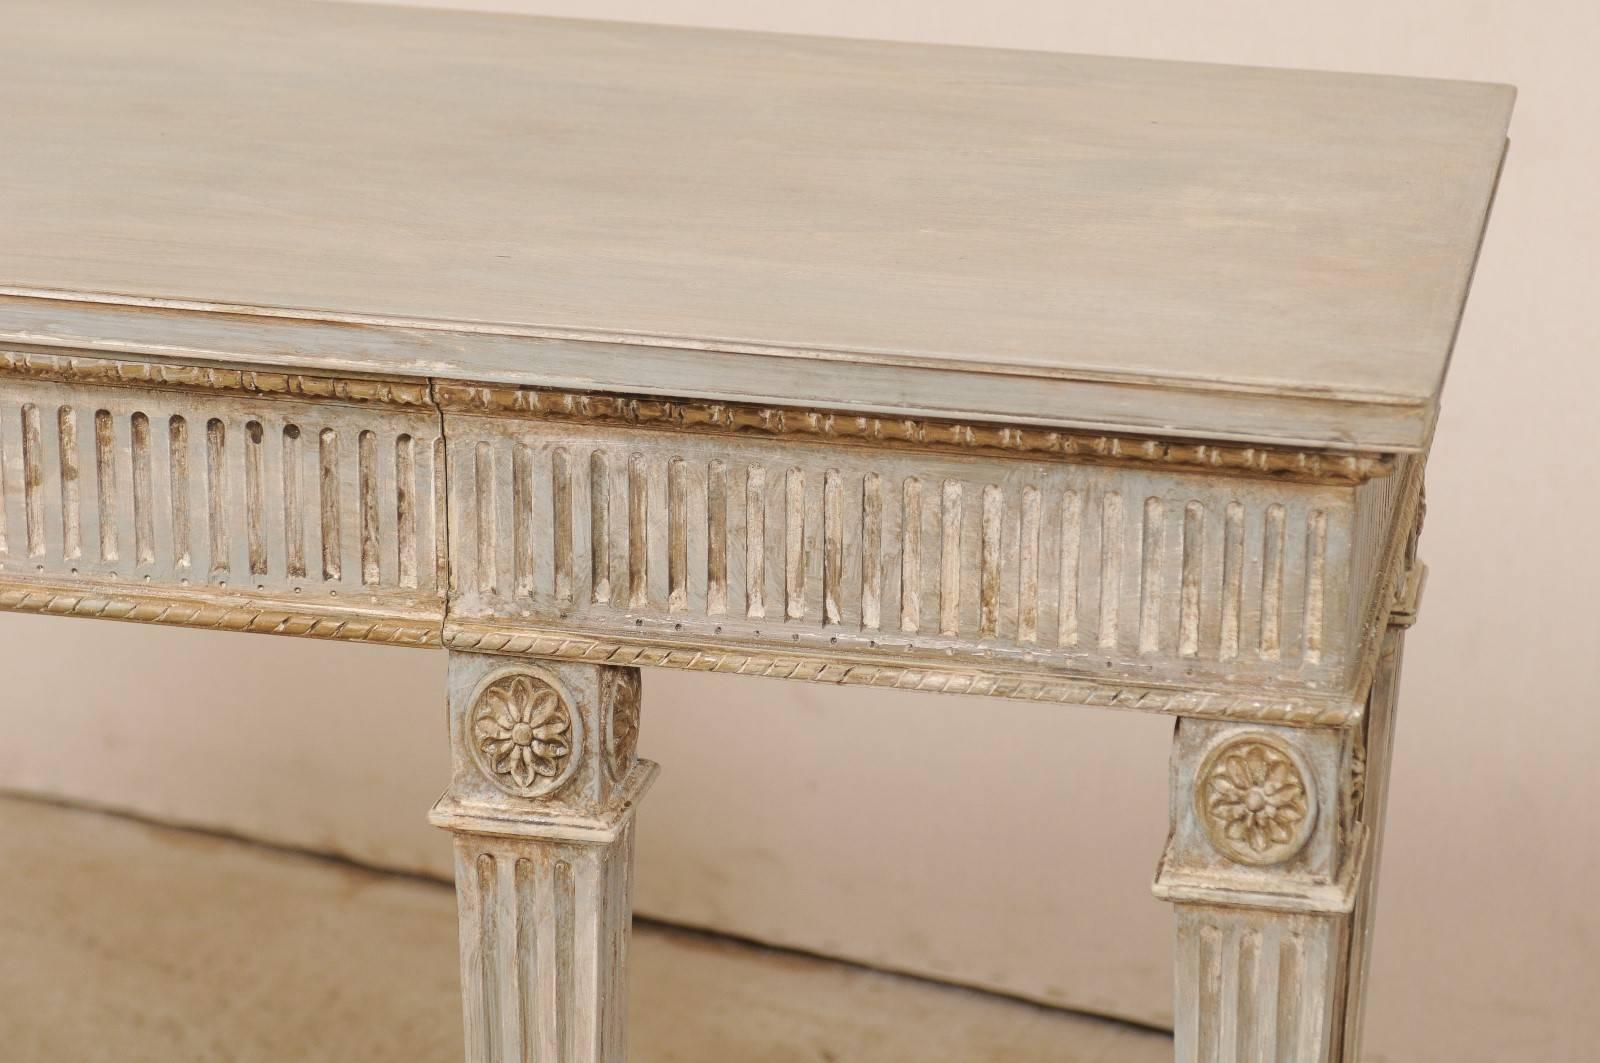 20th Century Gustavian Style Carved Wood Console Table with Fluting Detail & Discreet Drawers